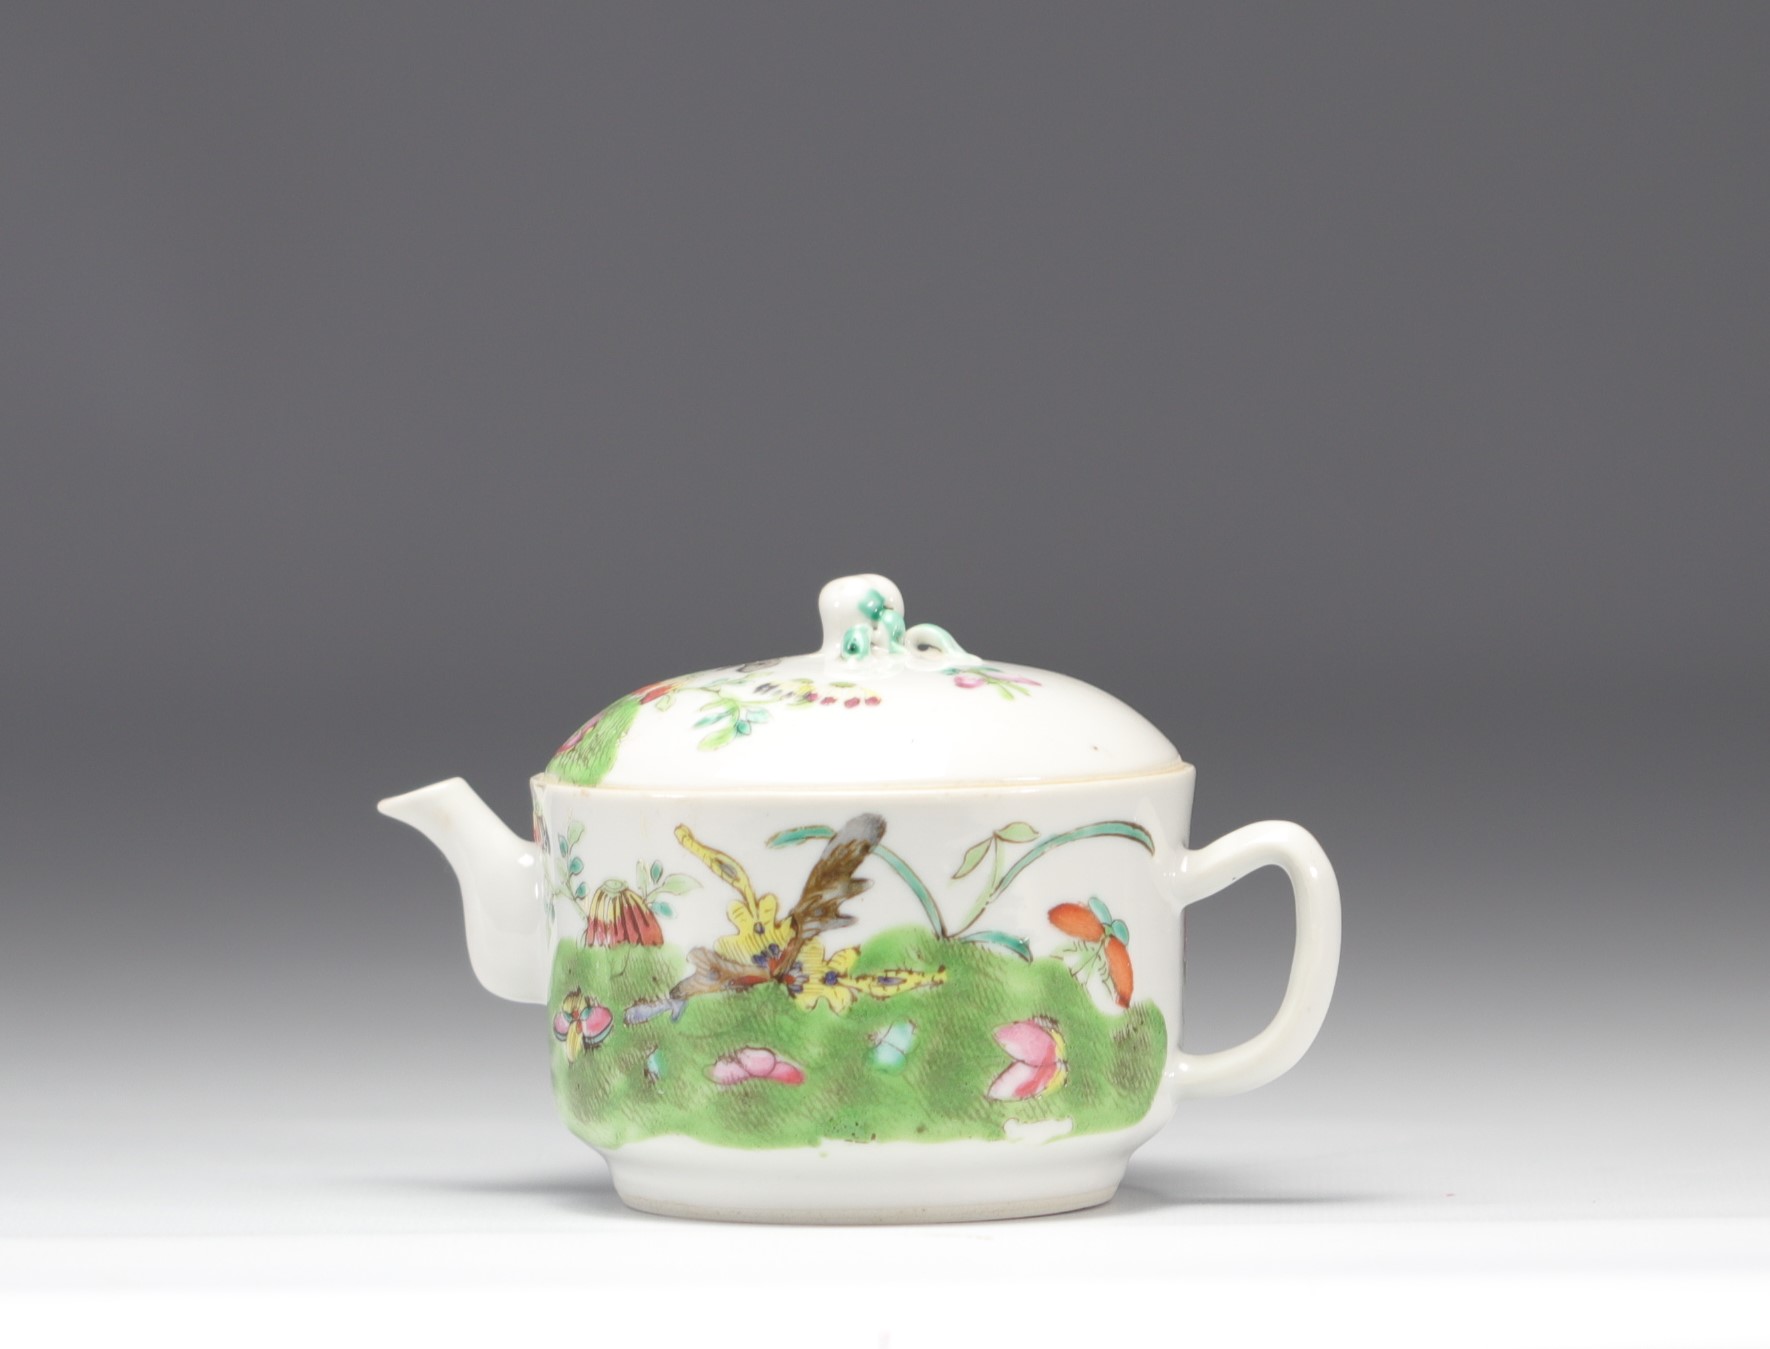 Famille rose porcelain teapot decorated with butterflies and flowers - Image 2 of 4